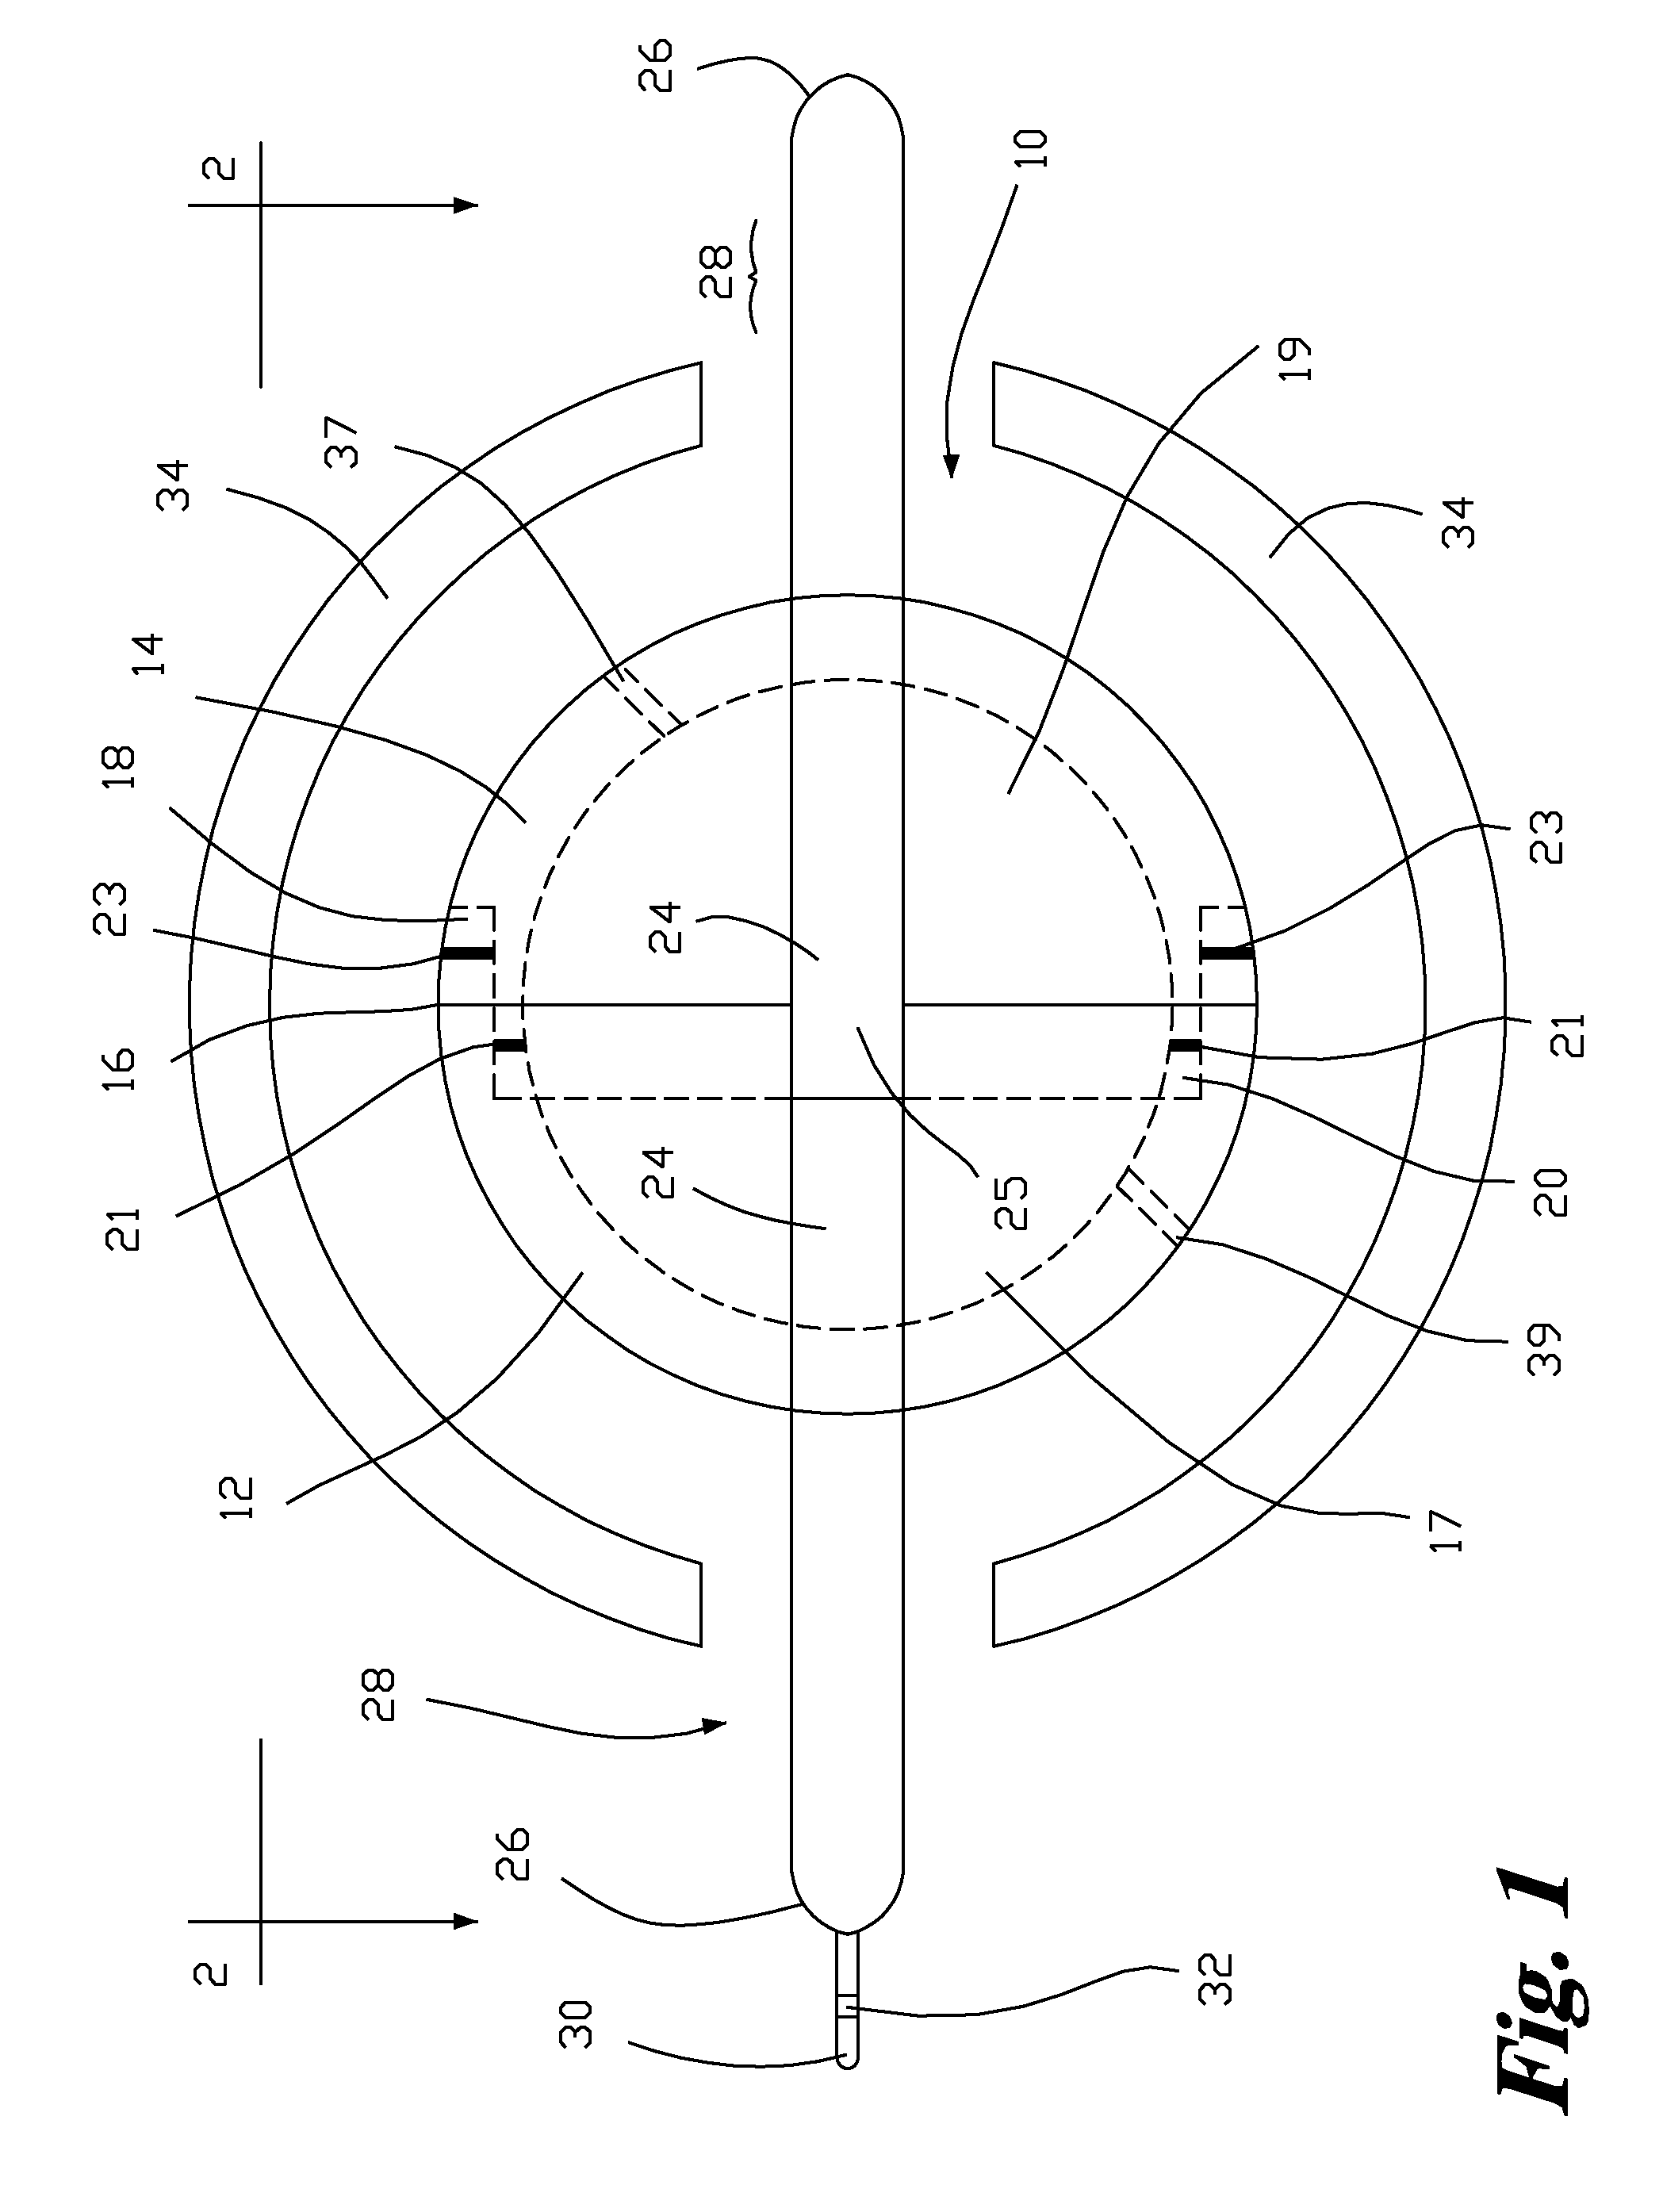 Separatable Shell for Receiving Candy Coating and Storing Toy